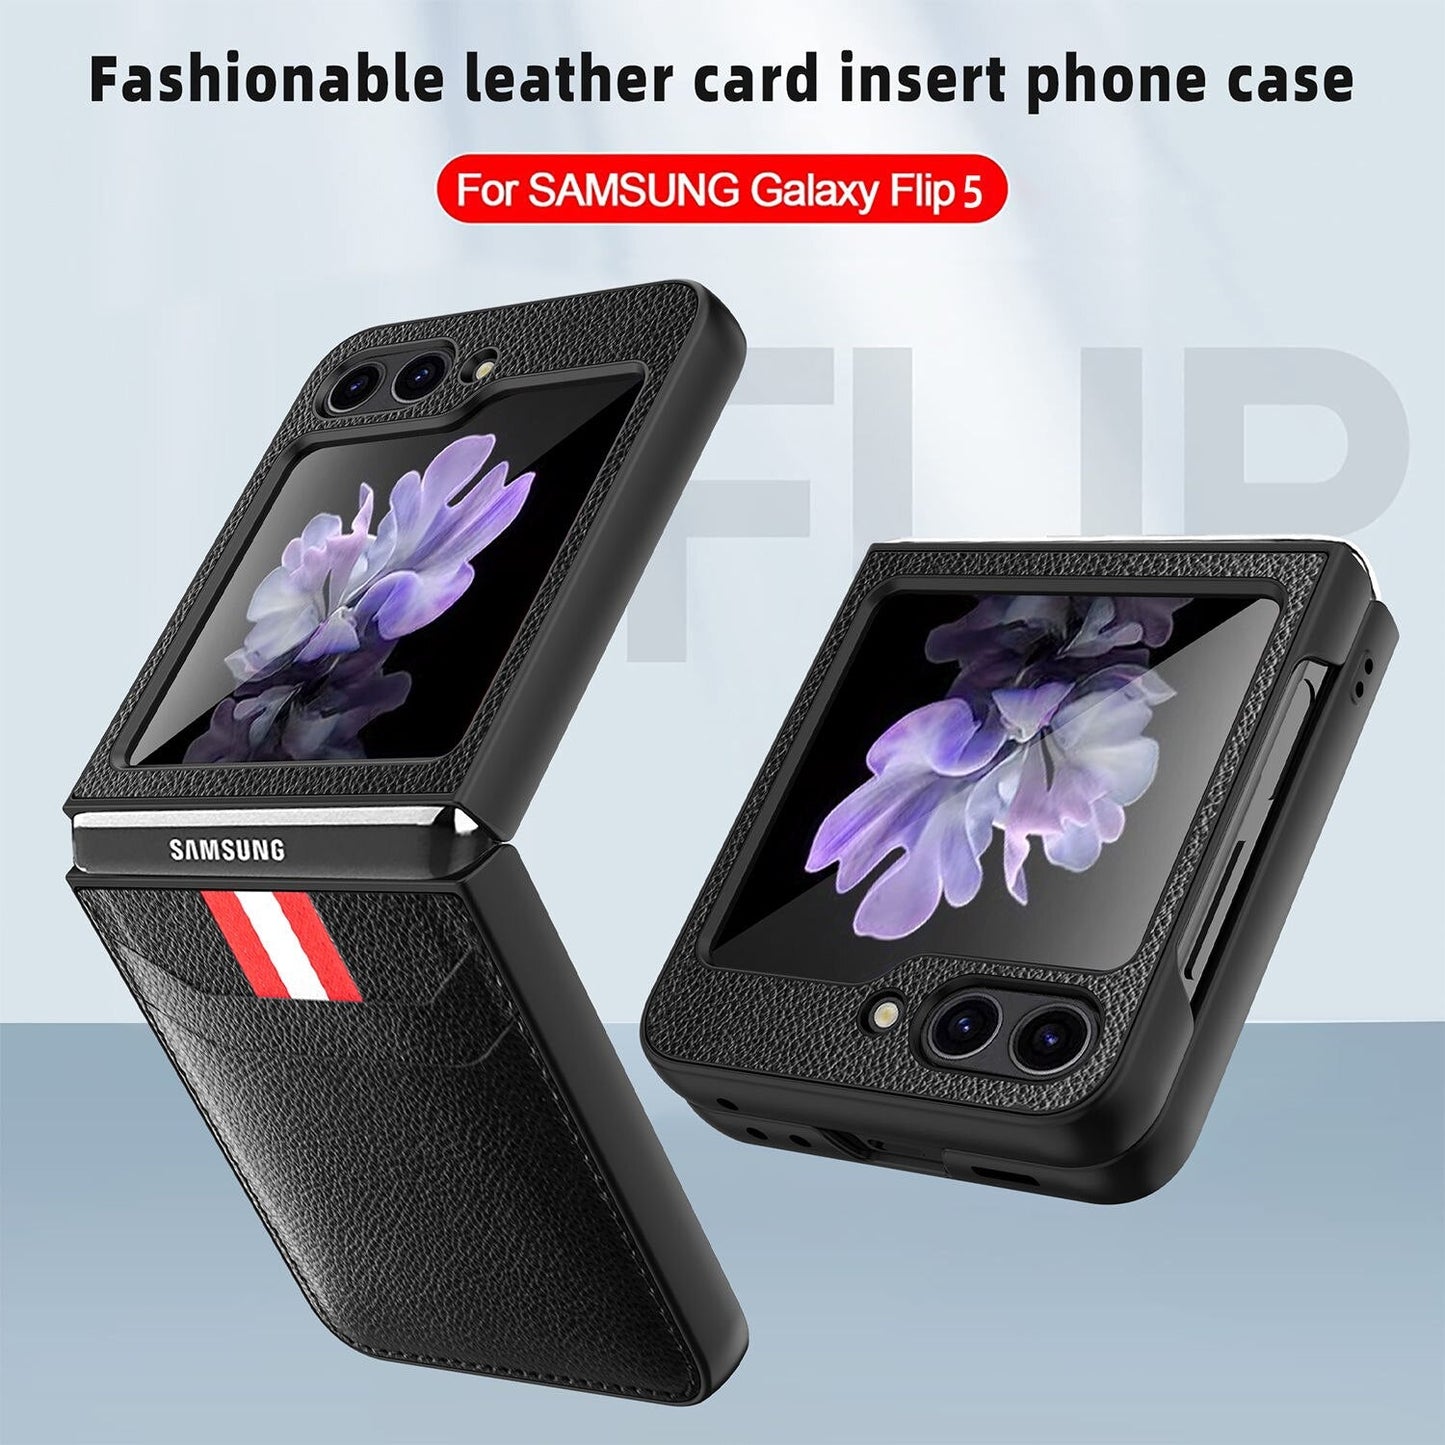 Leather Case with Card Holder for Samsung Galaxy Z Flip 5